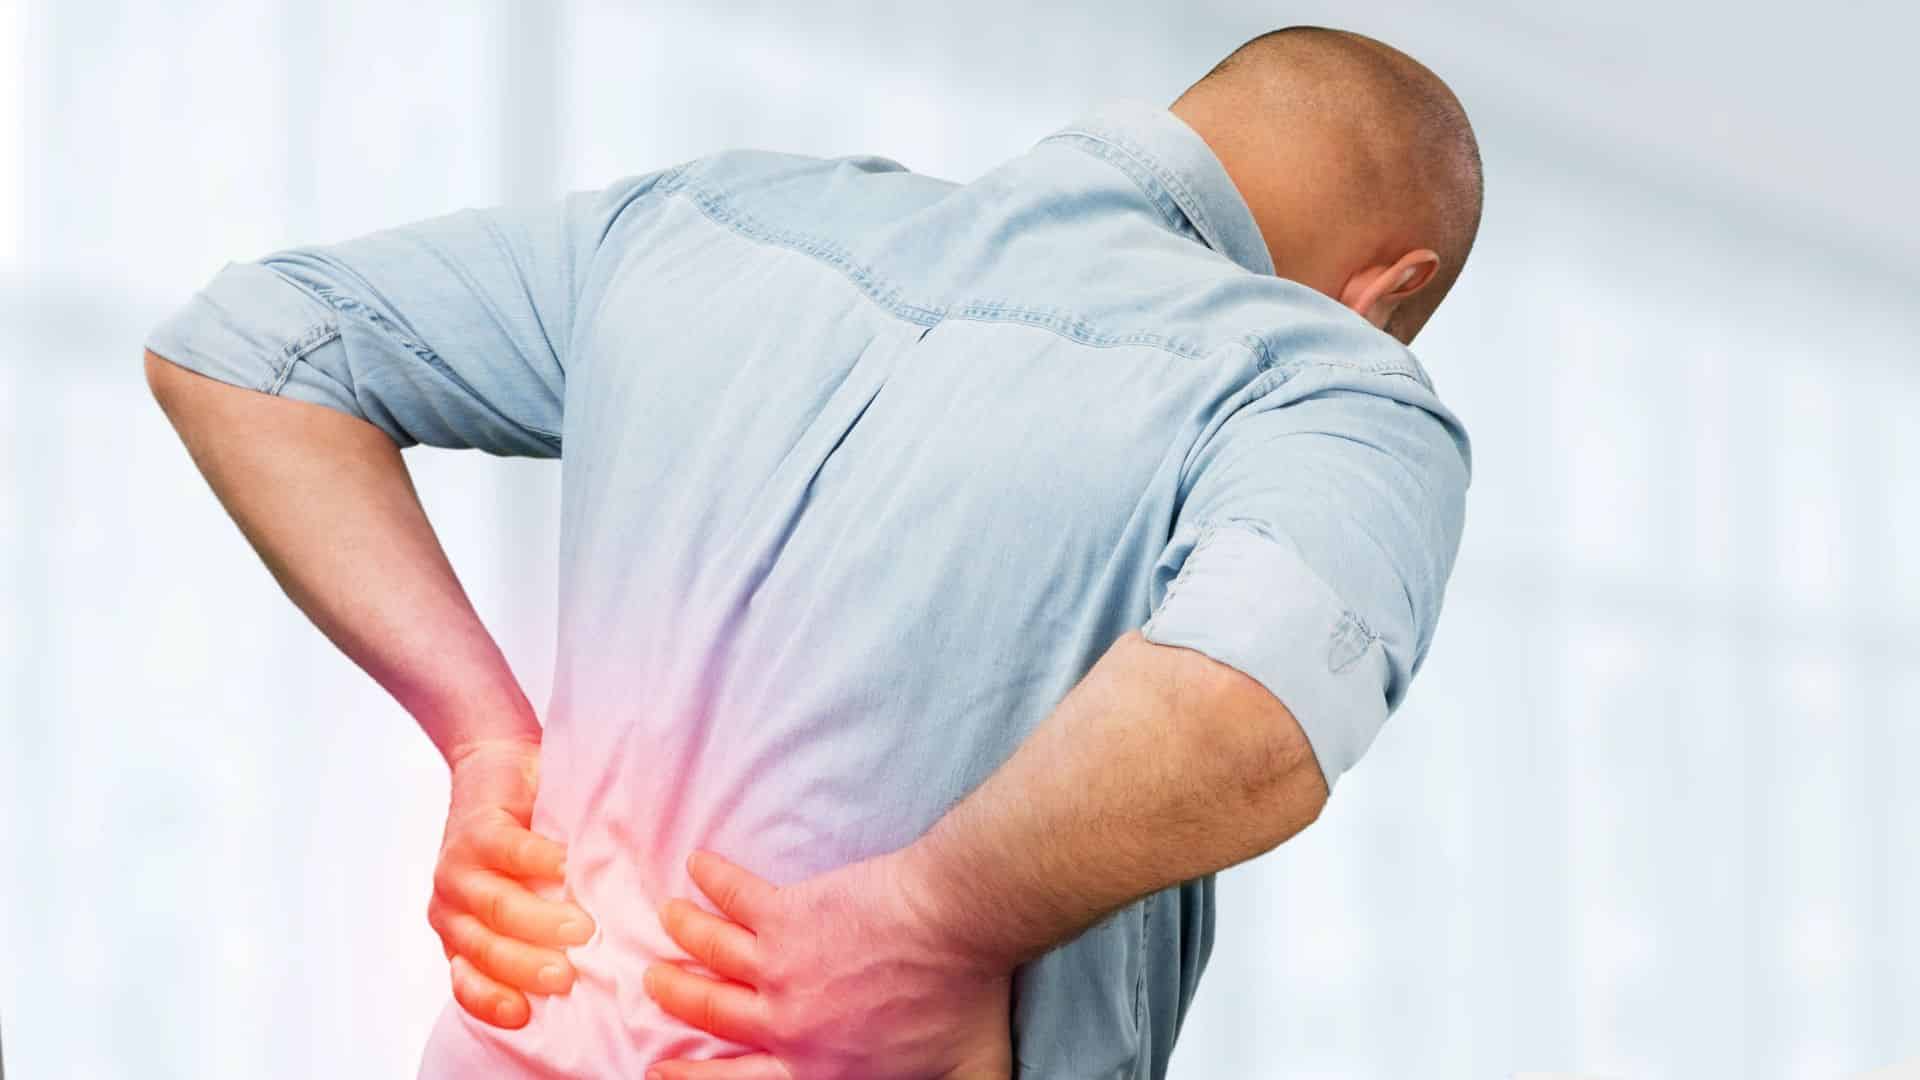 Mokena Pain Specialists — Providing The Relief You Deserve